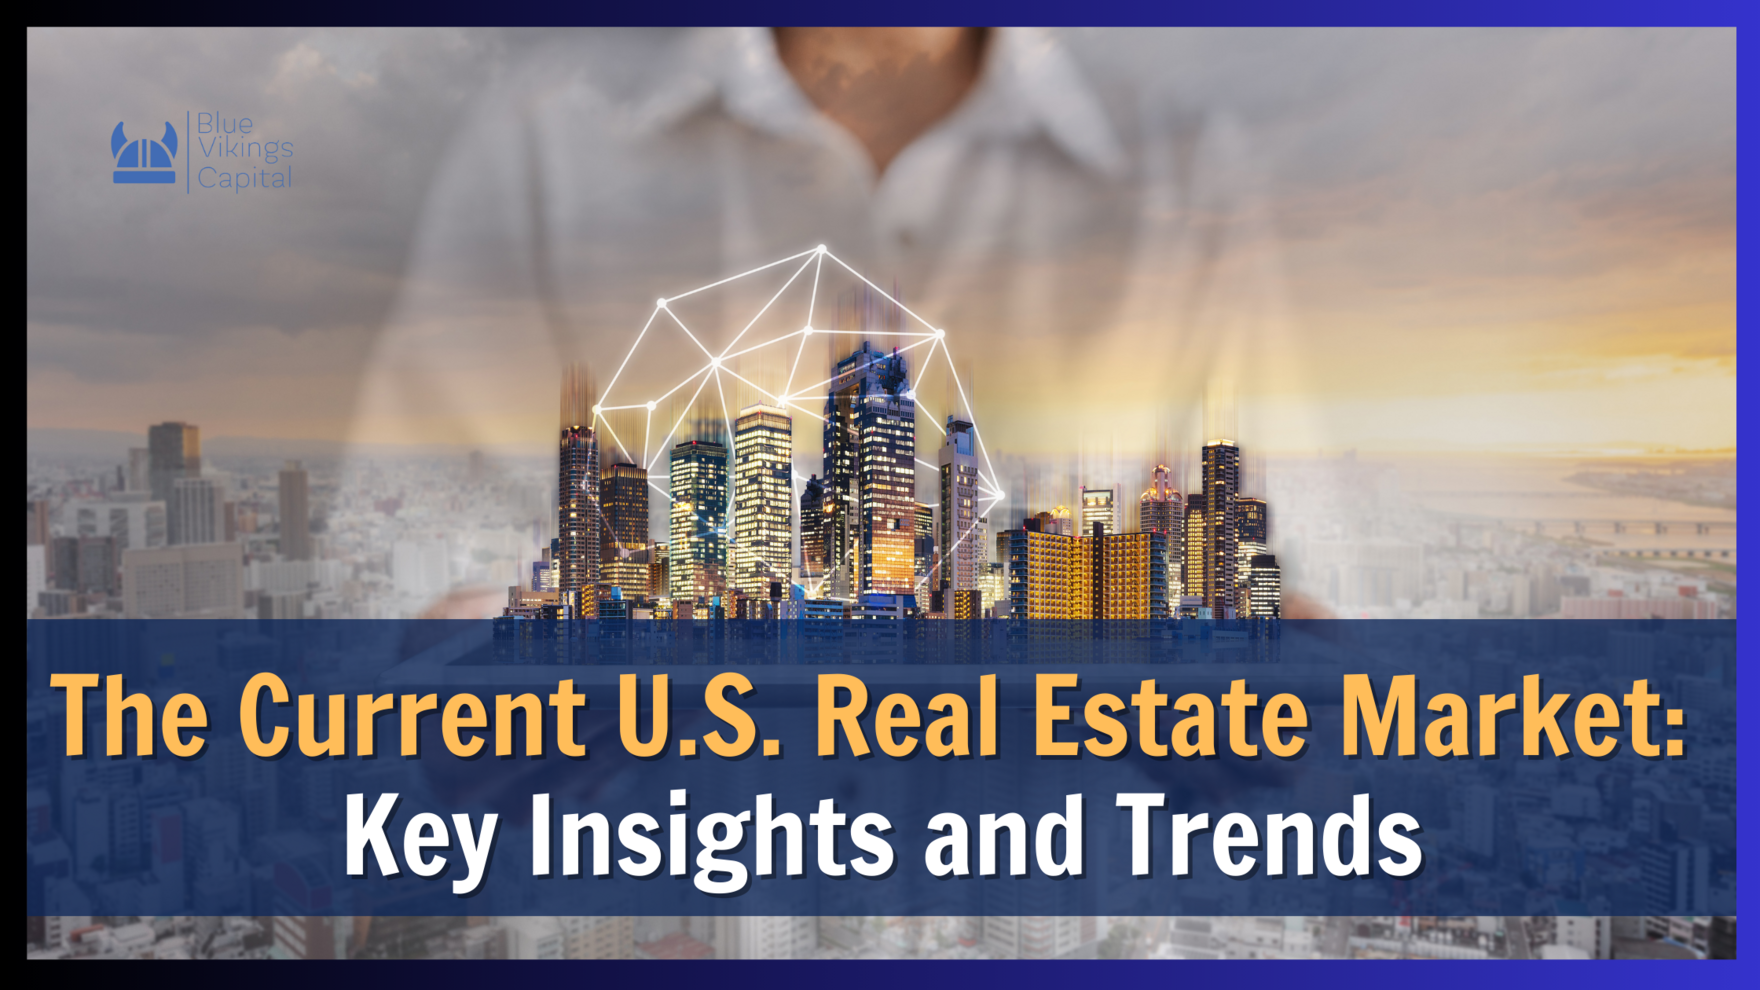 The Current U.S. Real Estate Market Key Insights and Trends